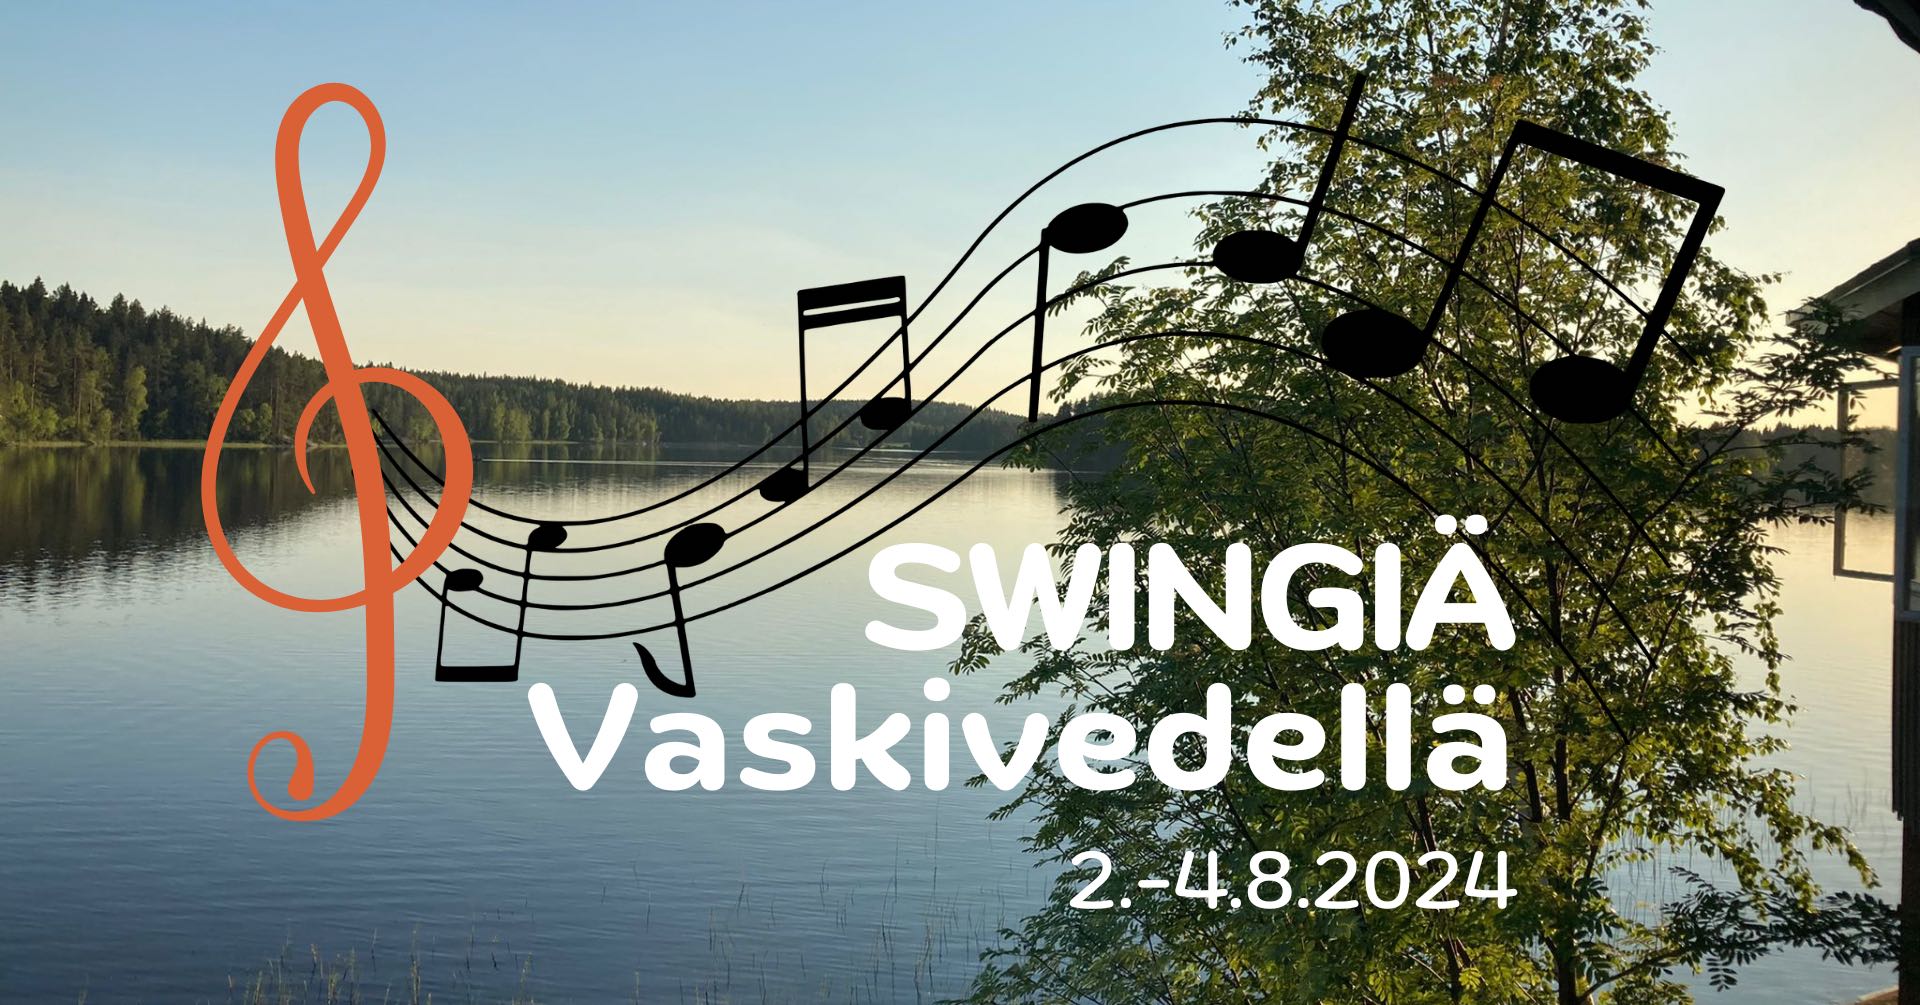 Early bird prices for Swingiä Vaskivedellä dance camp are only valid today